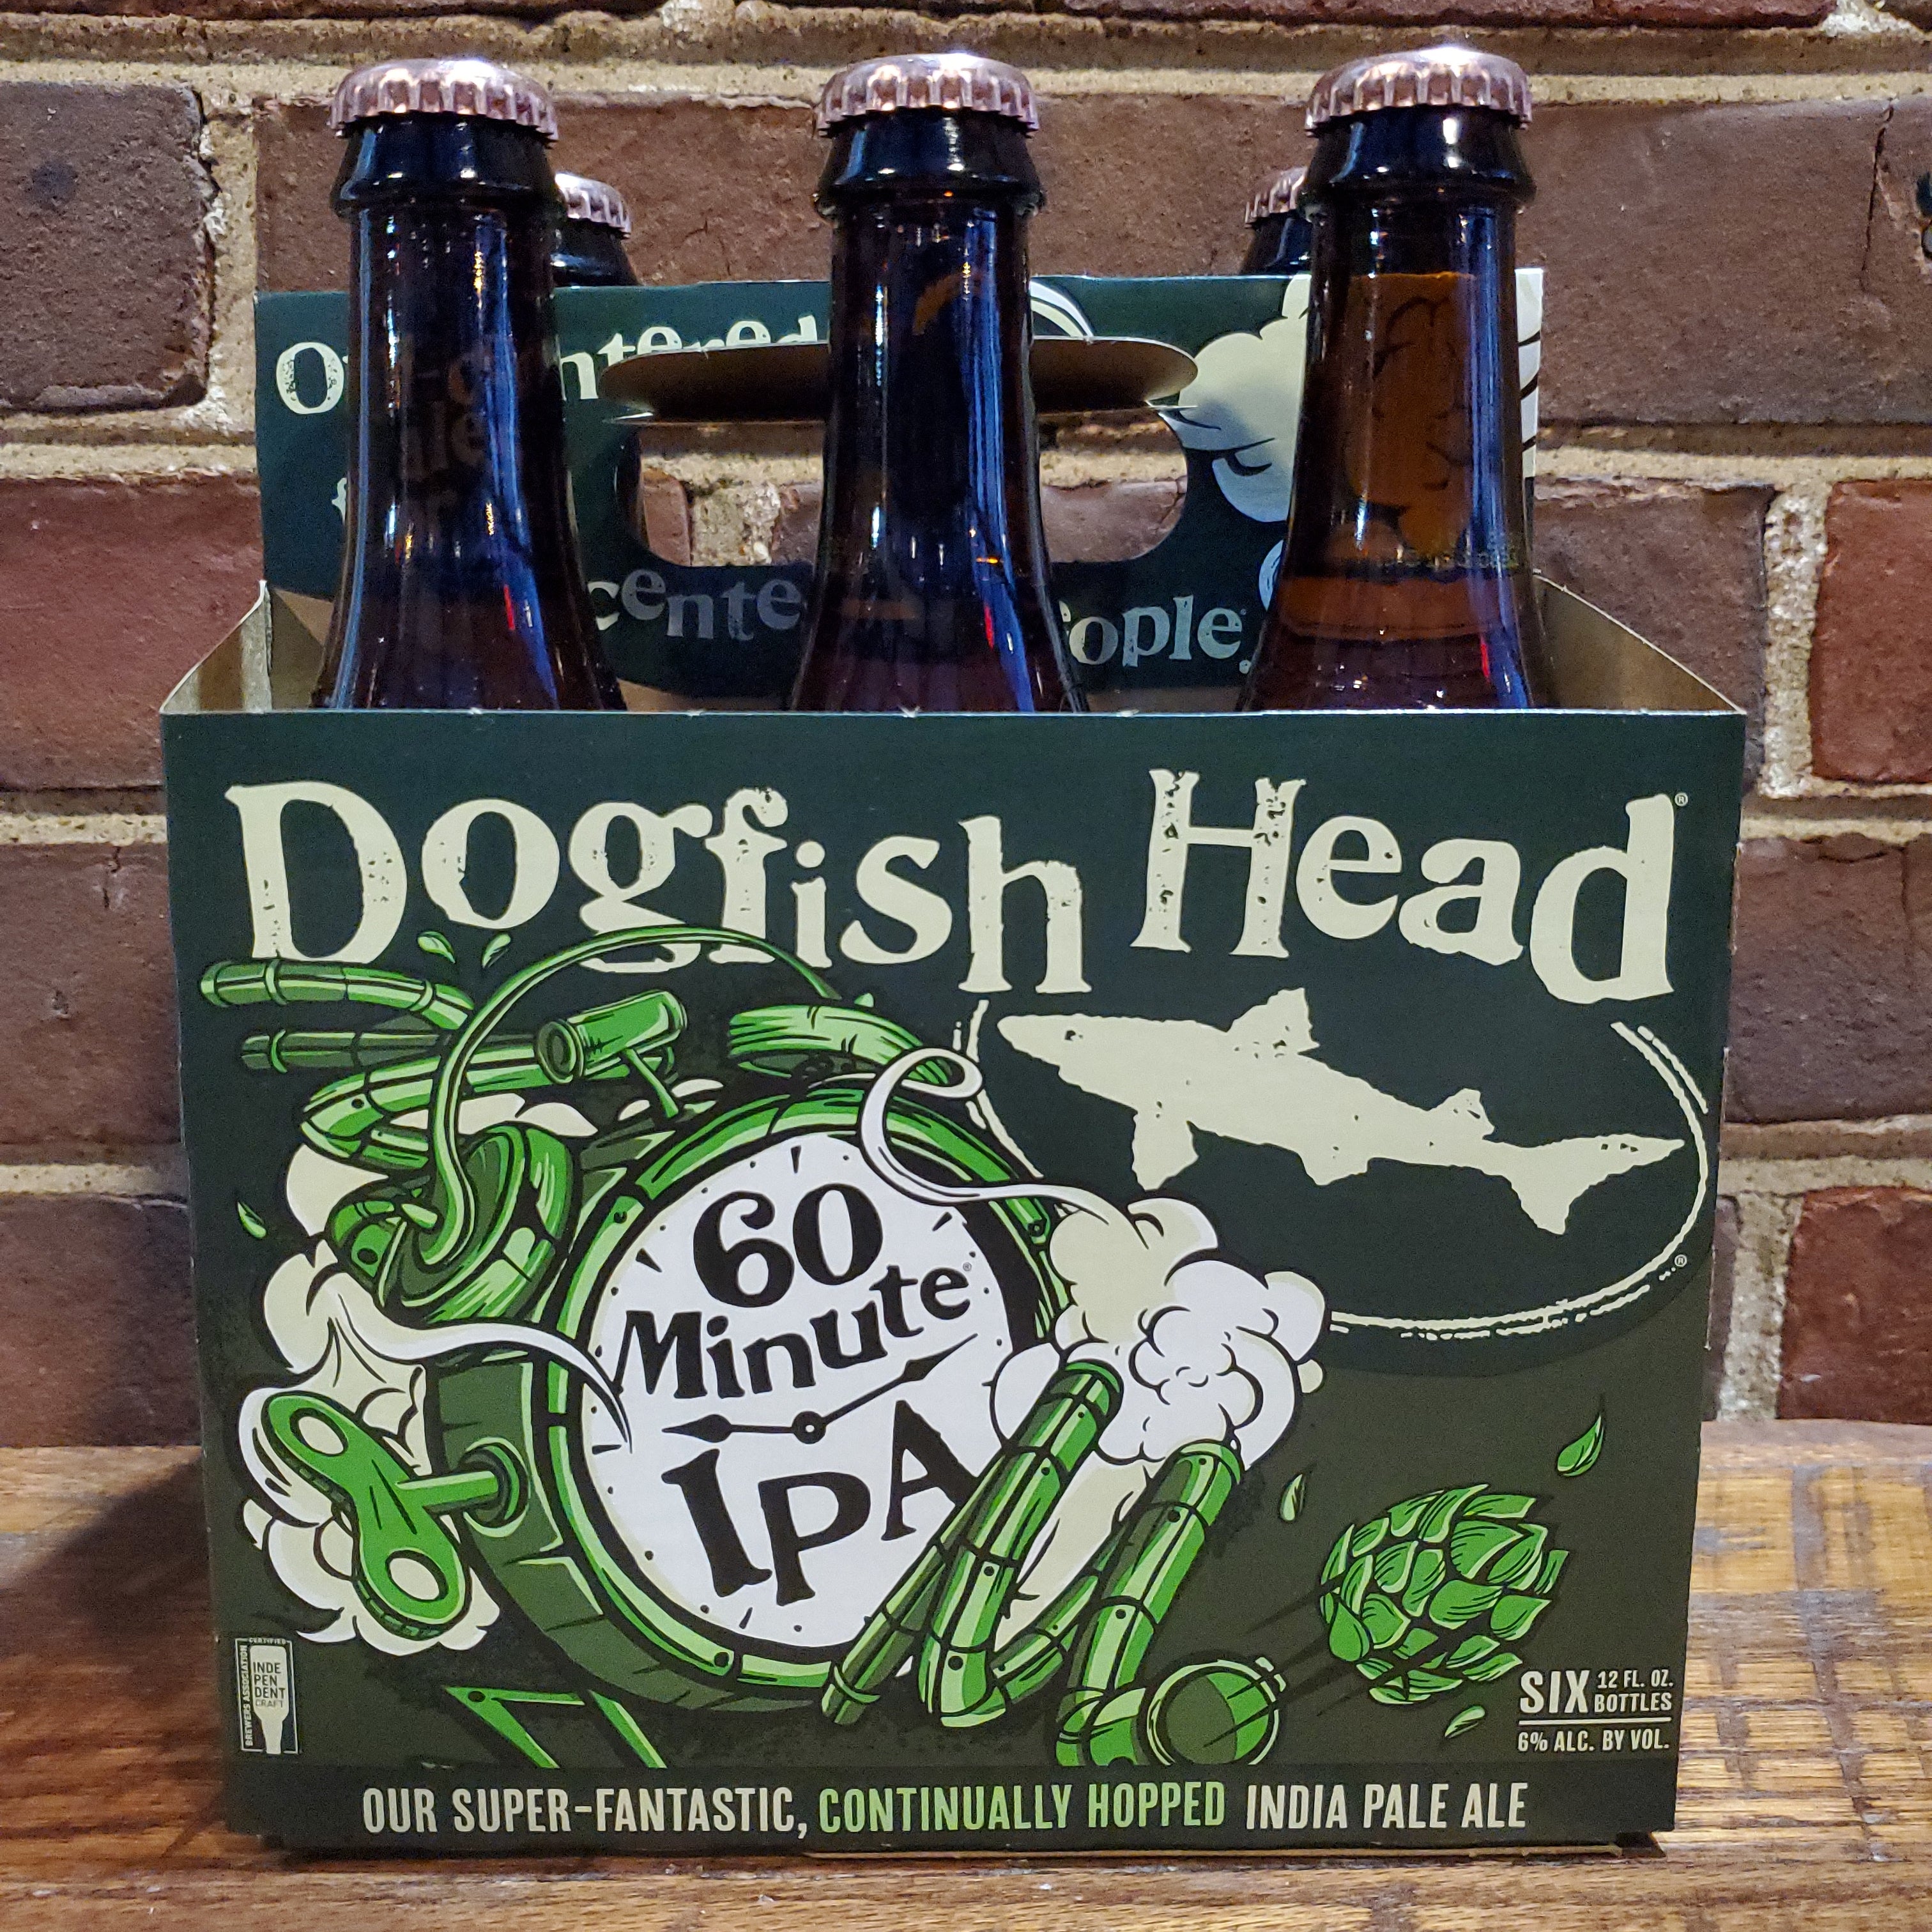 Dogfish Head 60 minute IPA 6 pack